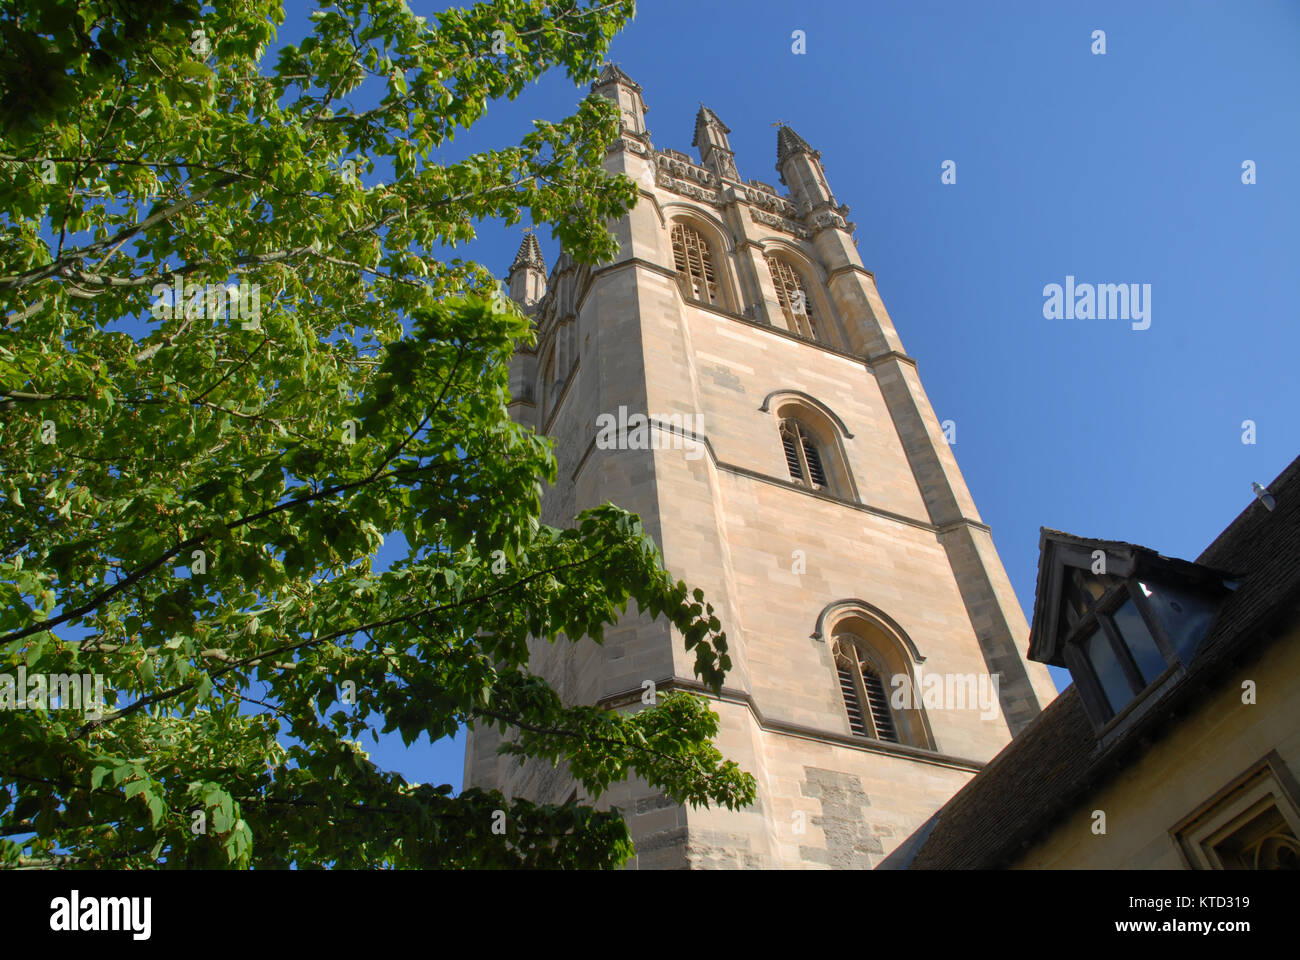 Oxford, United Kingdom - May 18, 2015: Magdalen tower in spring Stock Photo